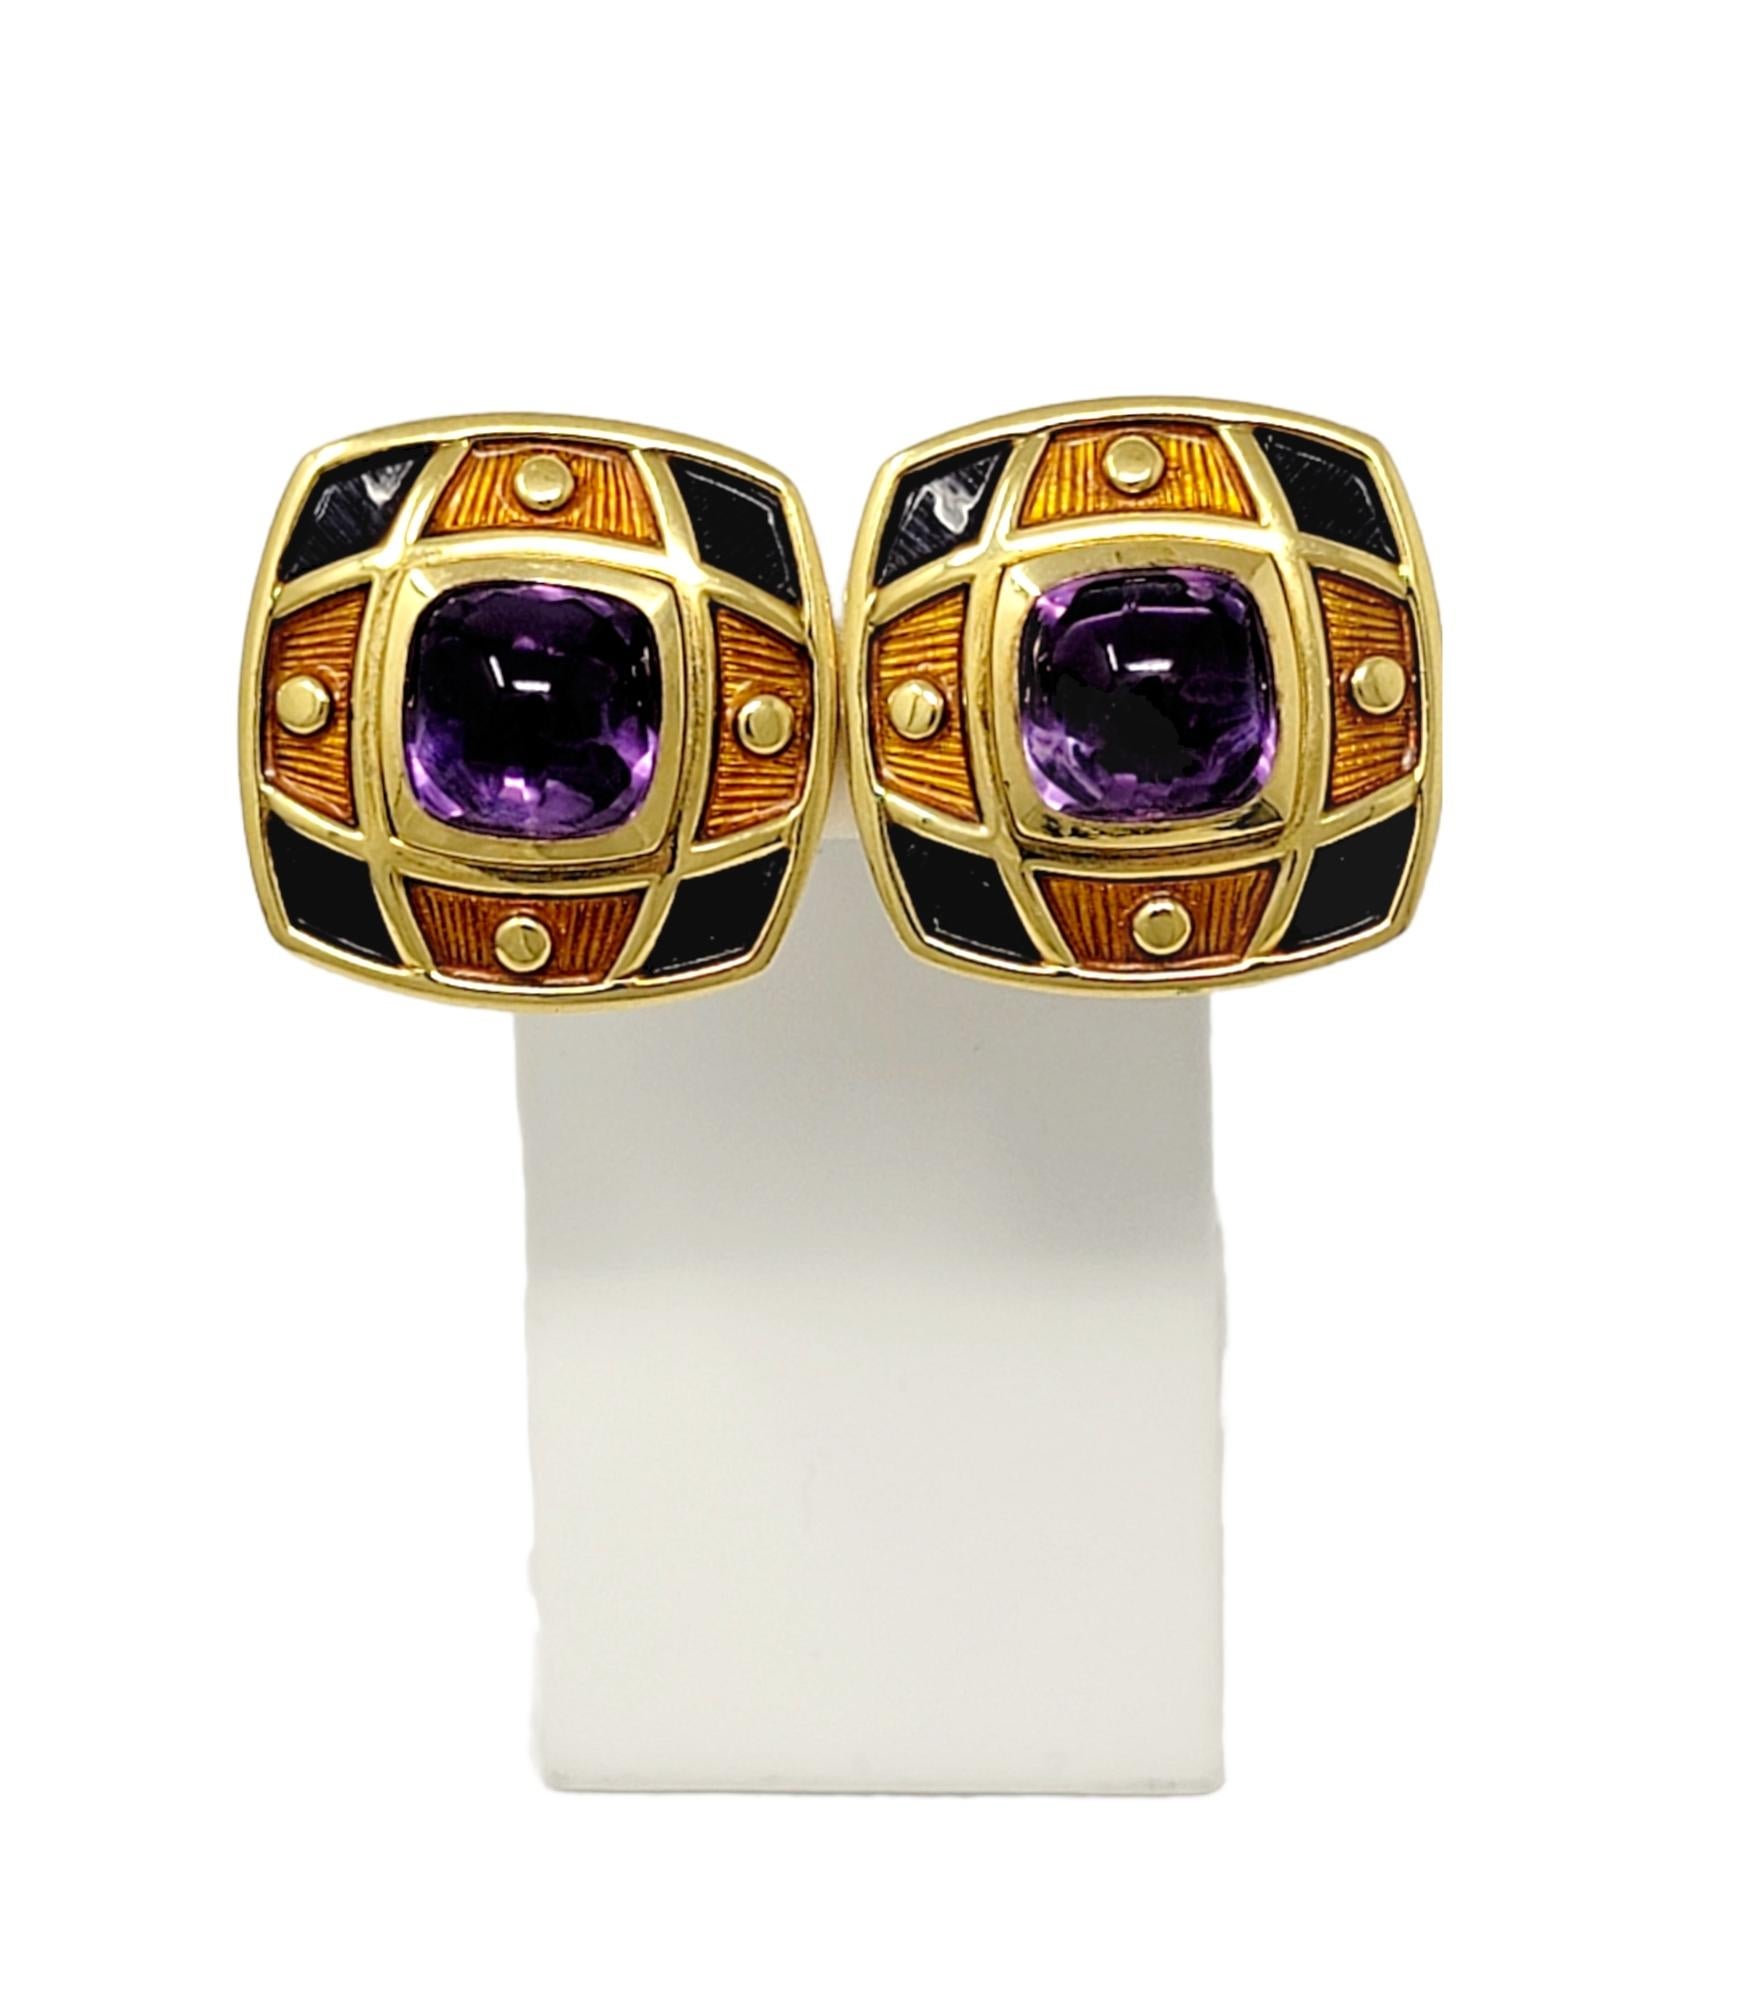 These striking amethyst earrings from designer Leo de Vroomen are absolutely gorgeous. Bold in both size and design, these colorful vintage beauties are accented with polished yellow gold and textured enamel. Made for any ear, these clip-on earrings